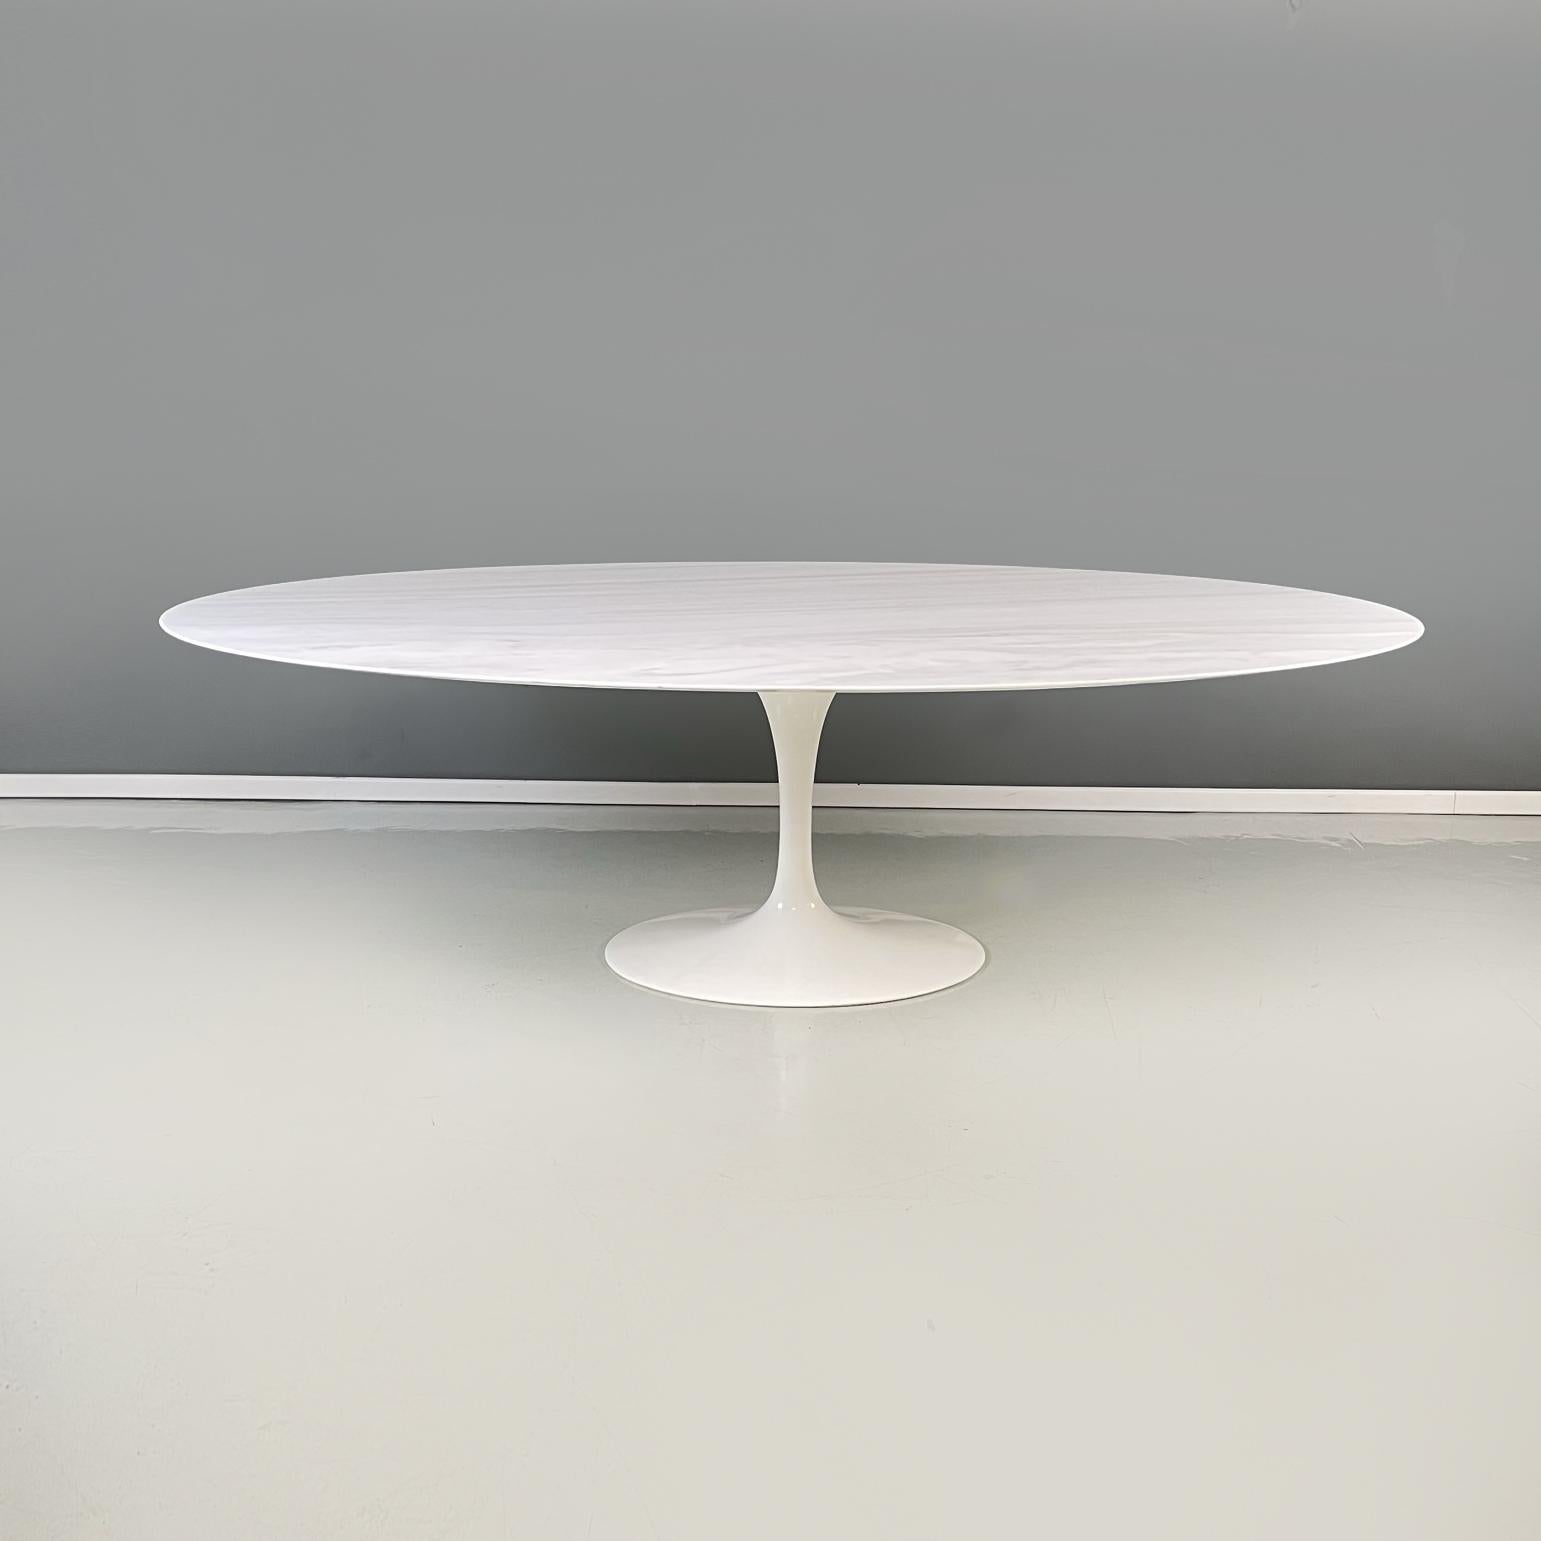 Usa modern Oval marble Dining table mod. Tulip by Eero Saarinen for Knoll, 1970s
Big dining table mod. Tulip with oval top in white and light gray marble. The leg is in white painted metal.
Produced by Knoll in 1970s and designed by Eero Saarinen